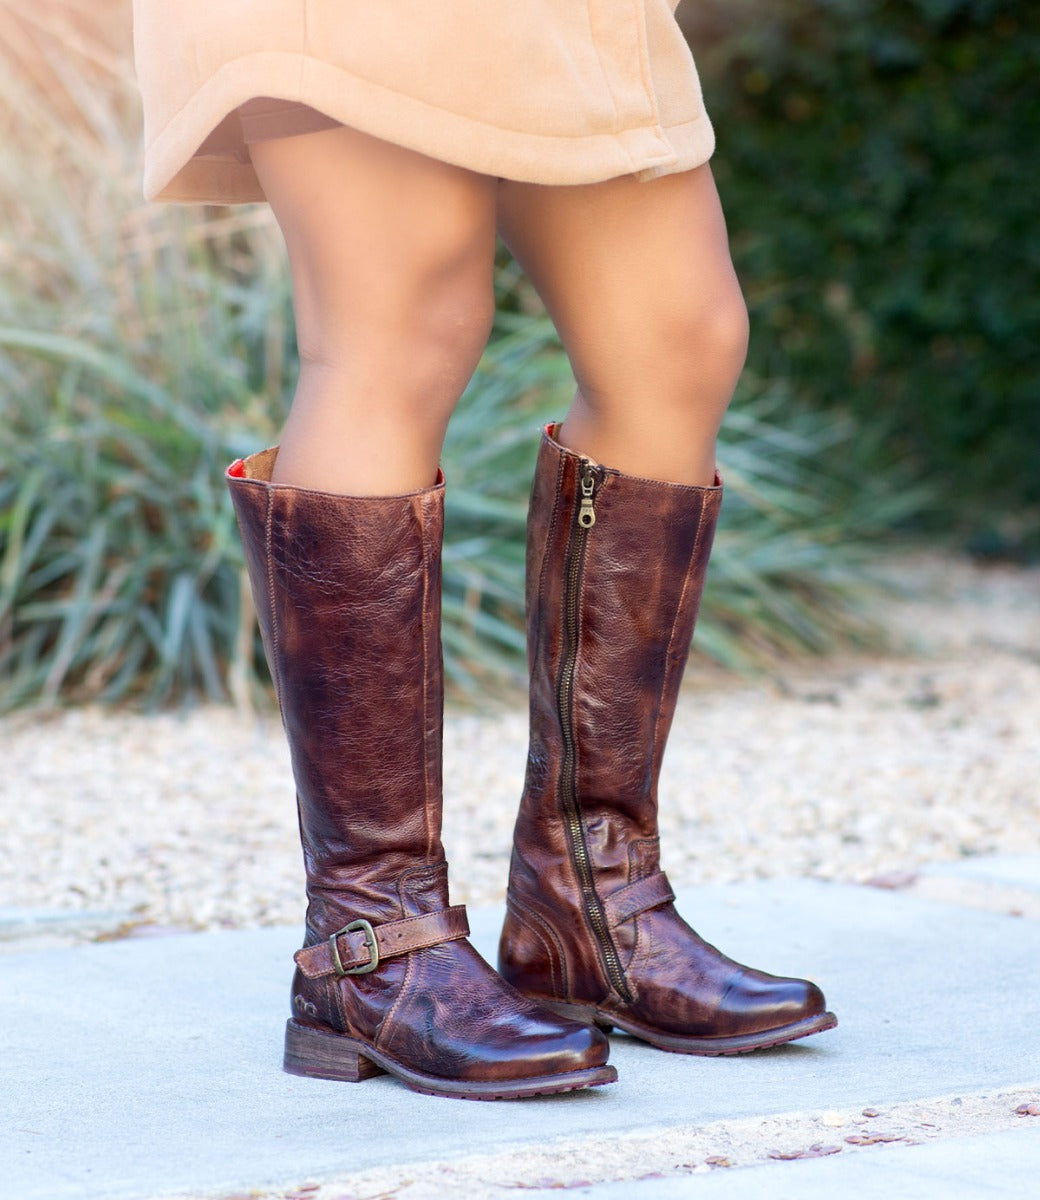 A woman wearing Bed Stu Glaye brown leather boots and a tan skirt.